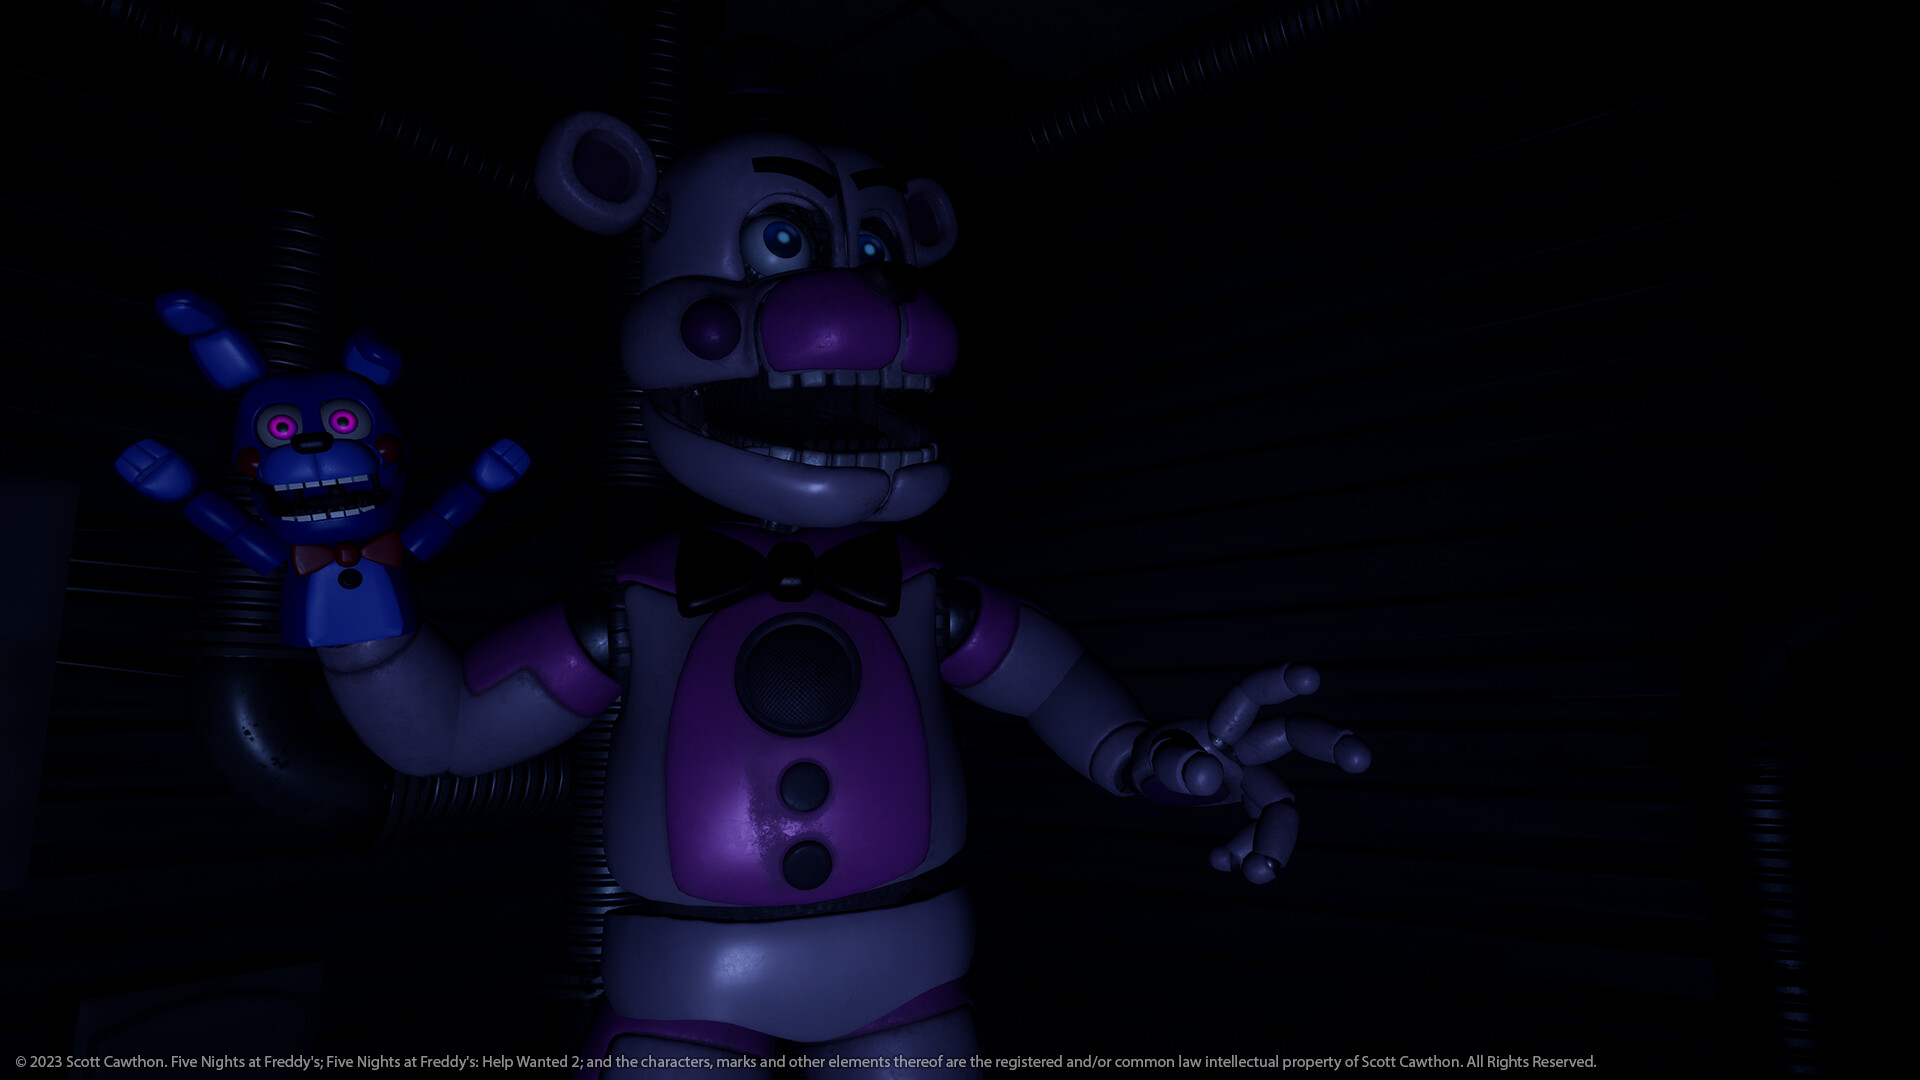 FNAF Help Wanted NON-VR FLAT MODE